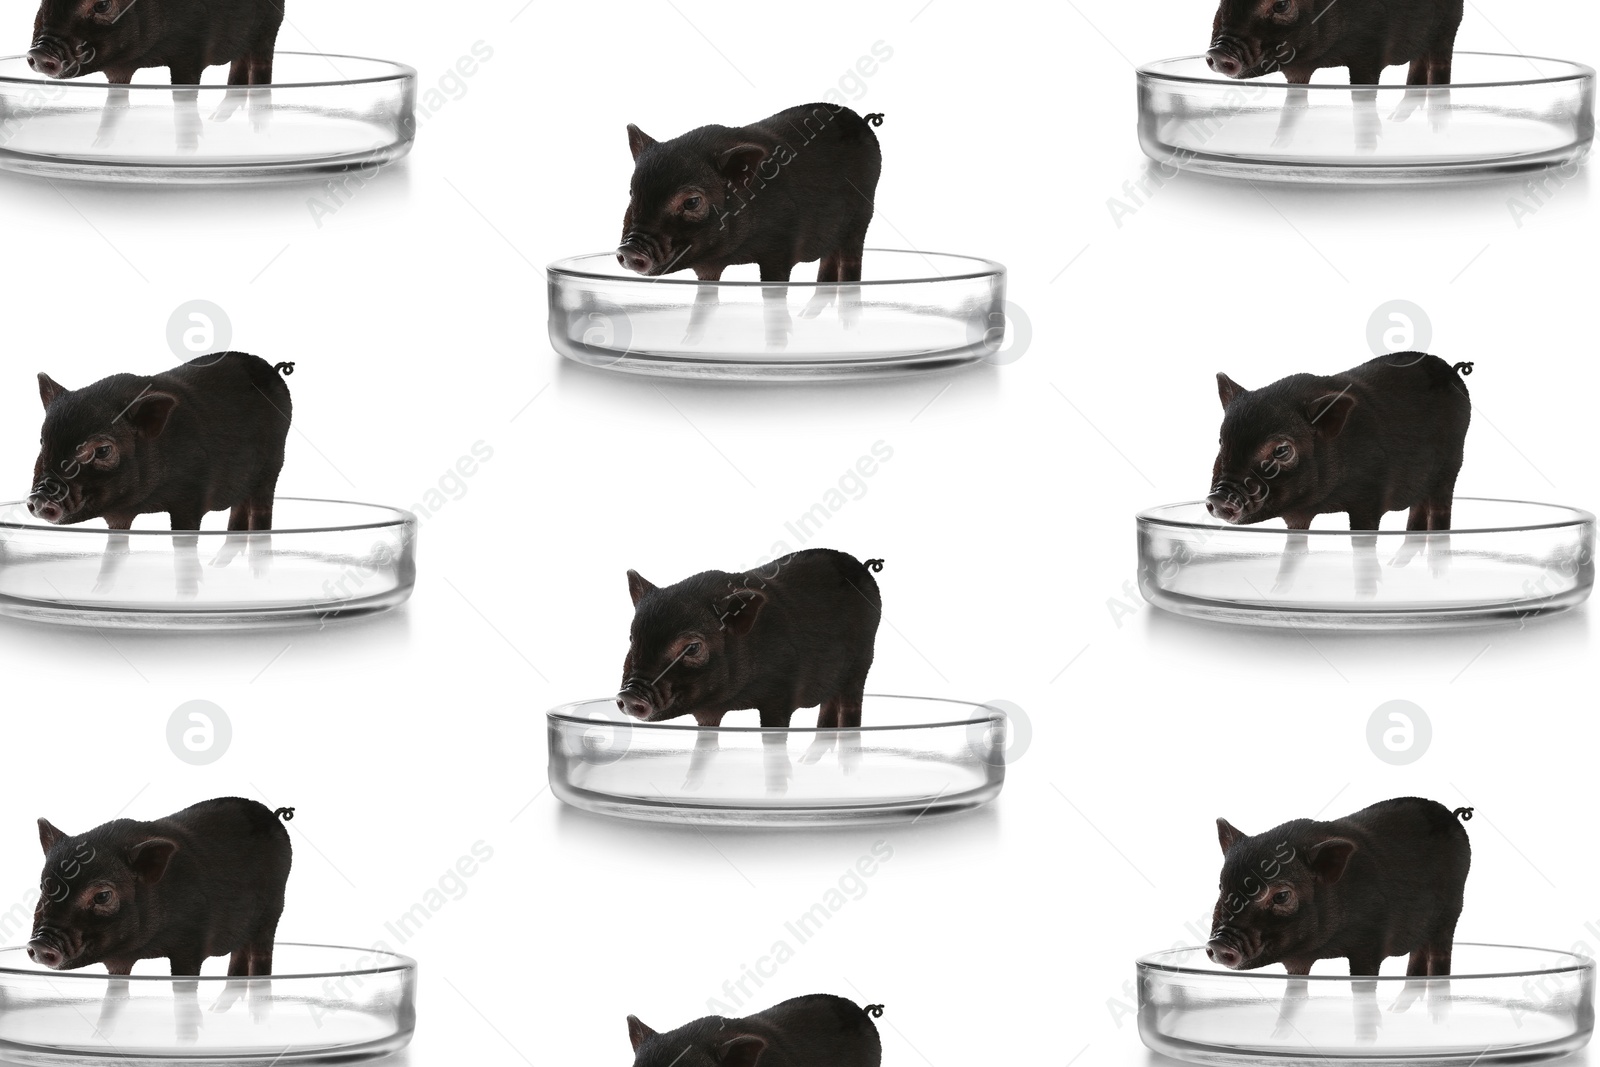 Image of Small pigs in Petri dishes on white background, pattern design. Cultured meat concept